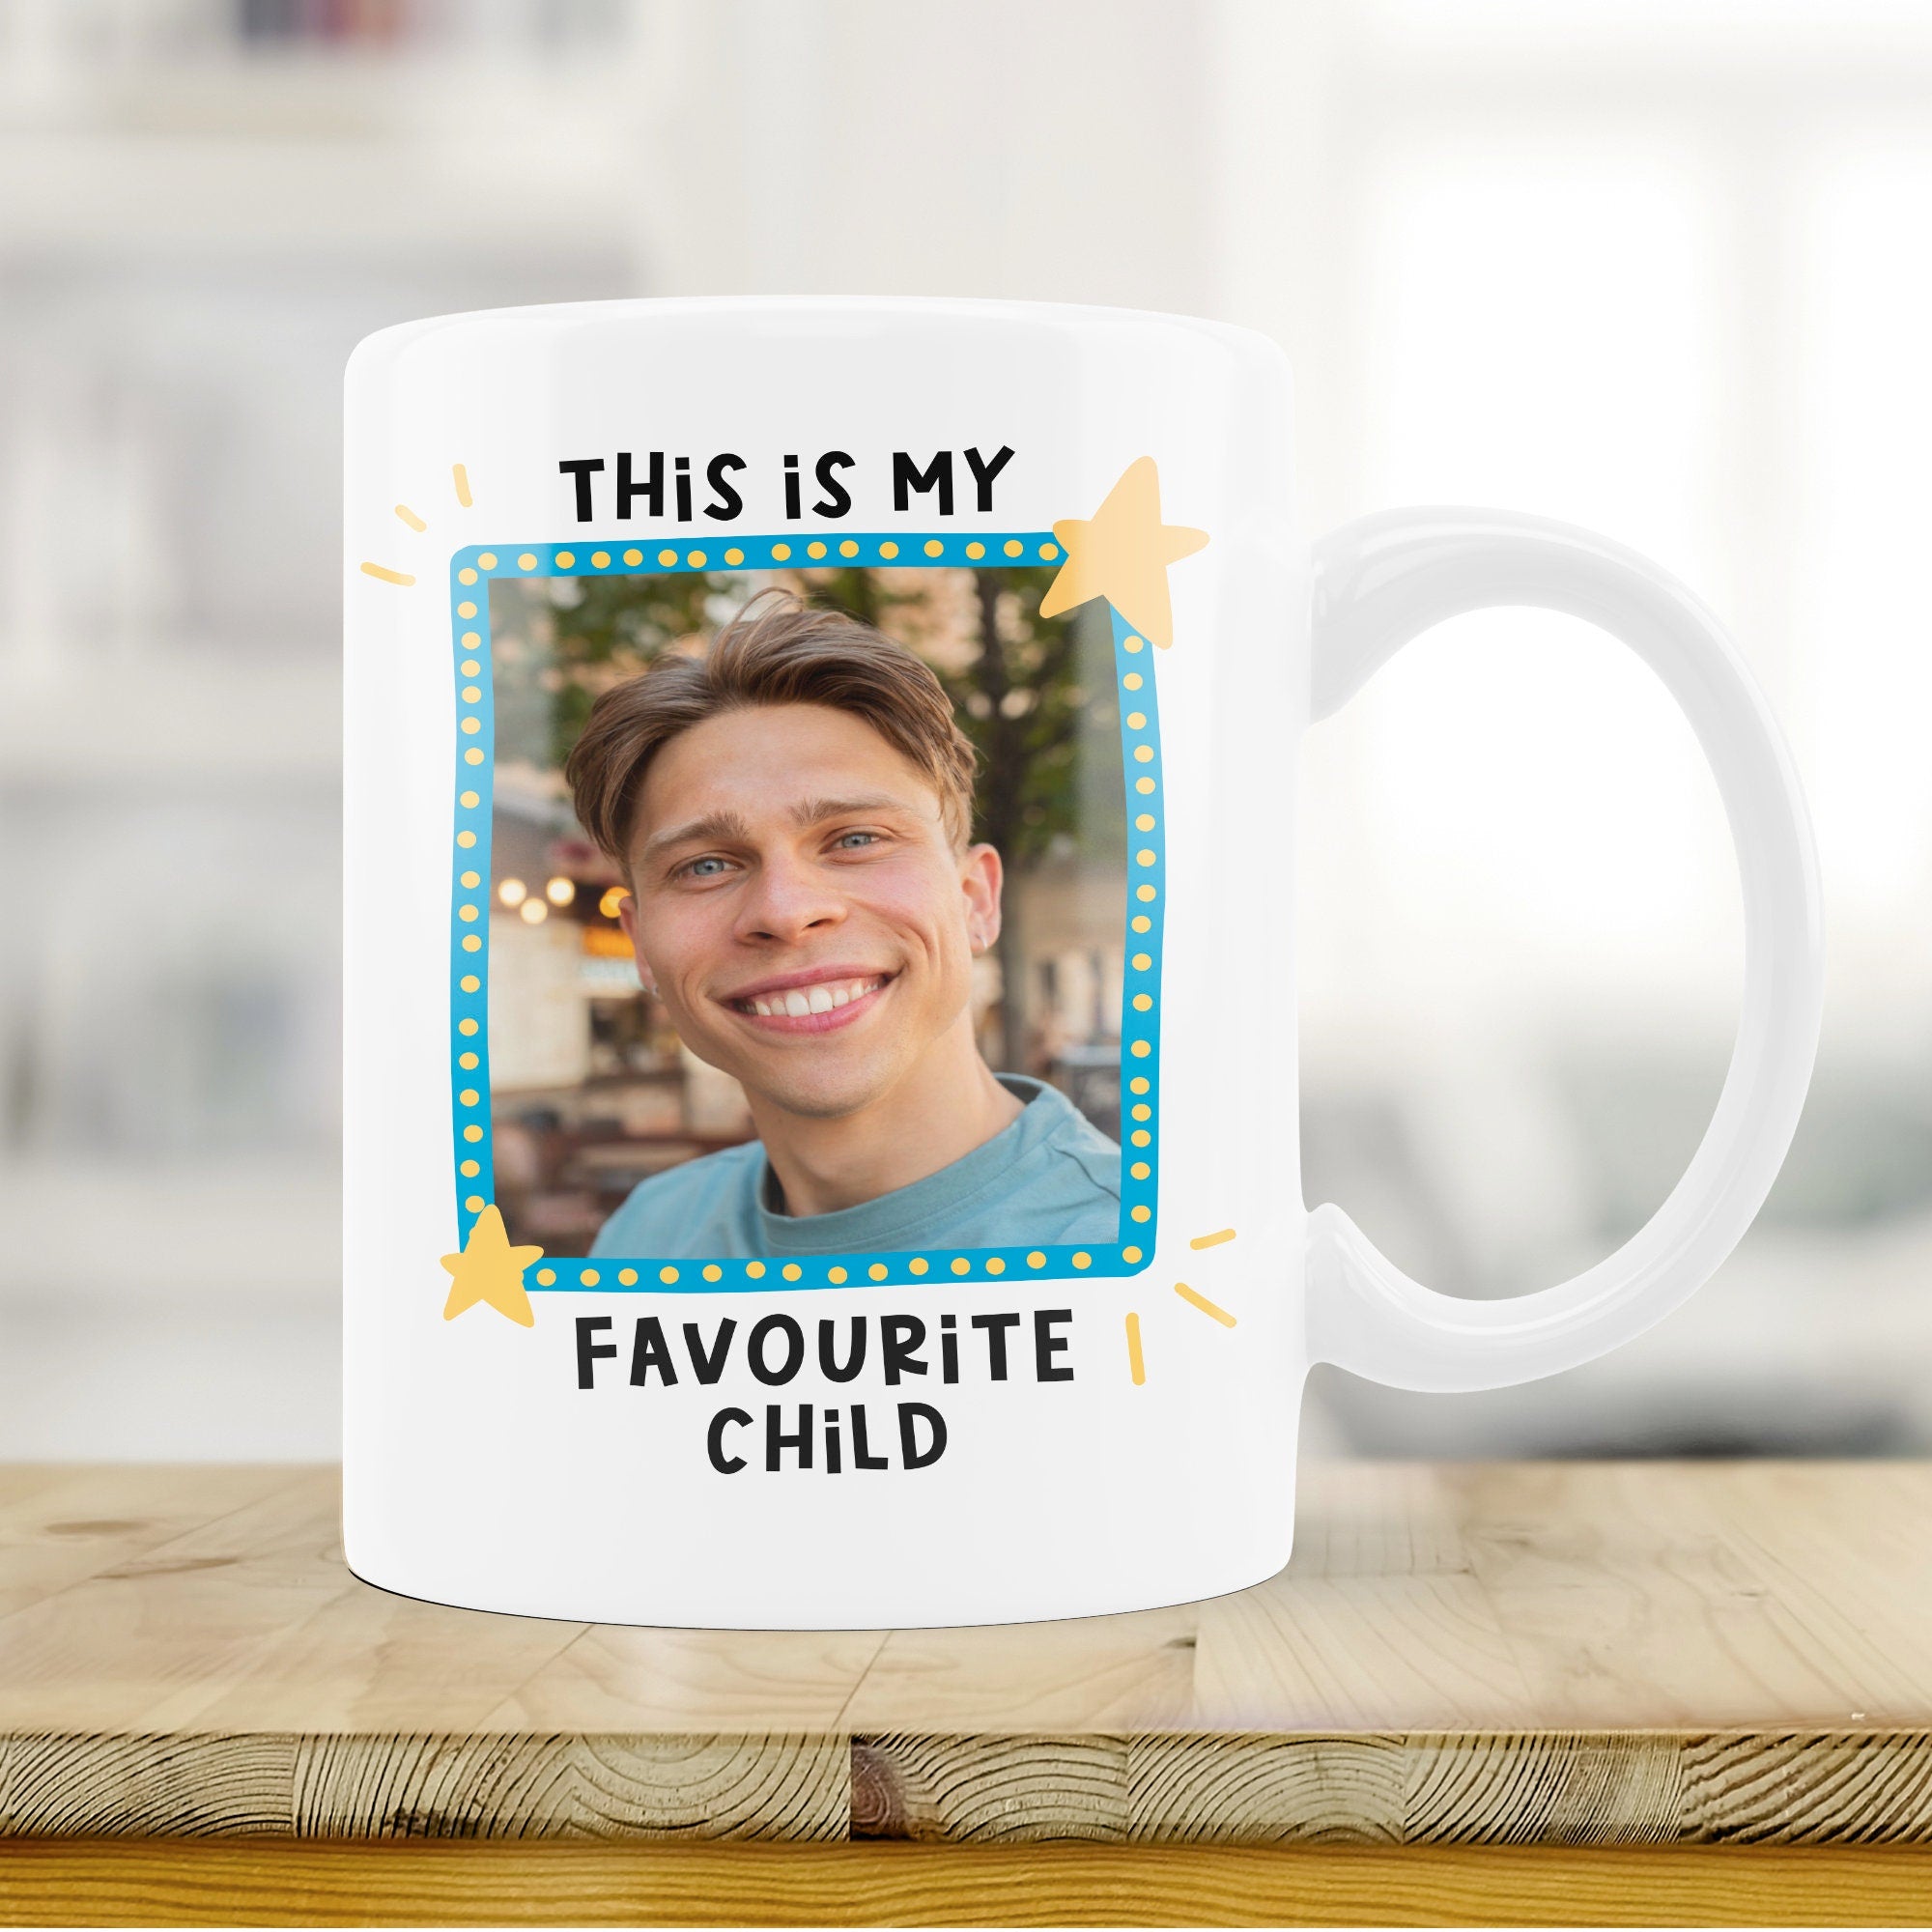 Personalised Photo Mug, Funny Favourite Child Mug, Funny Fathers Day Gift, Funny Cup for Dad, Funny Birthday Gift Dad, Father's